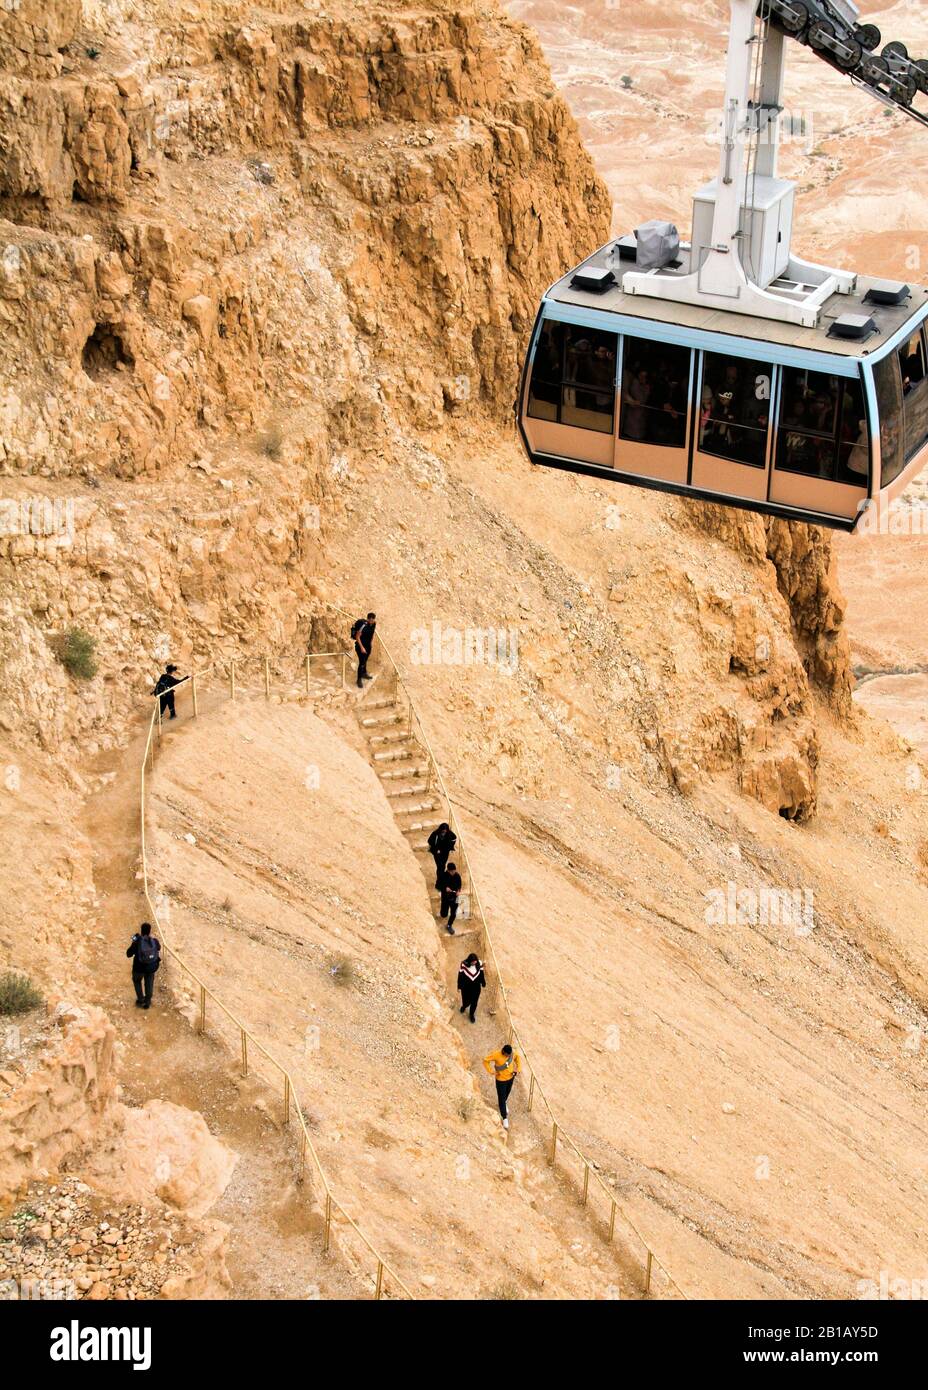 The cable car descends from the top of Masada as people walk down below it. Stock Photo